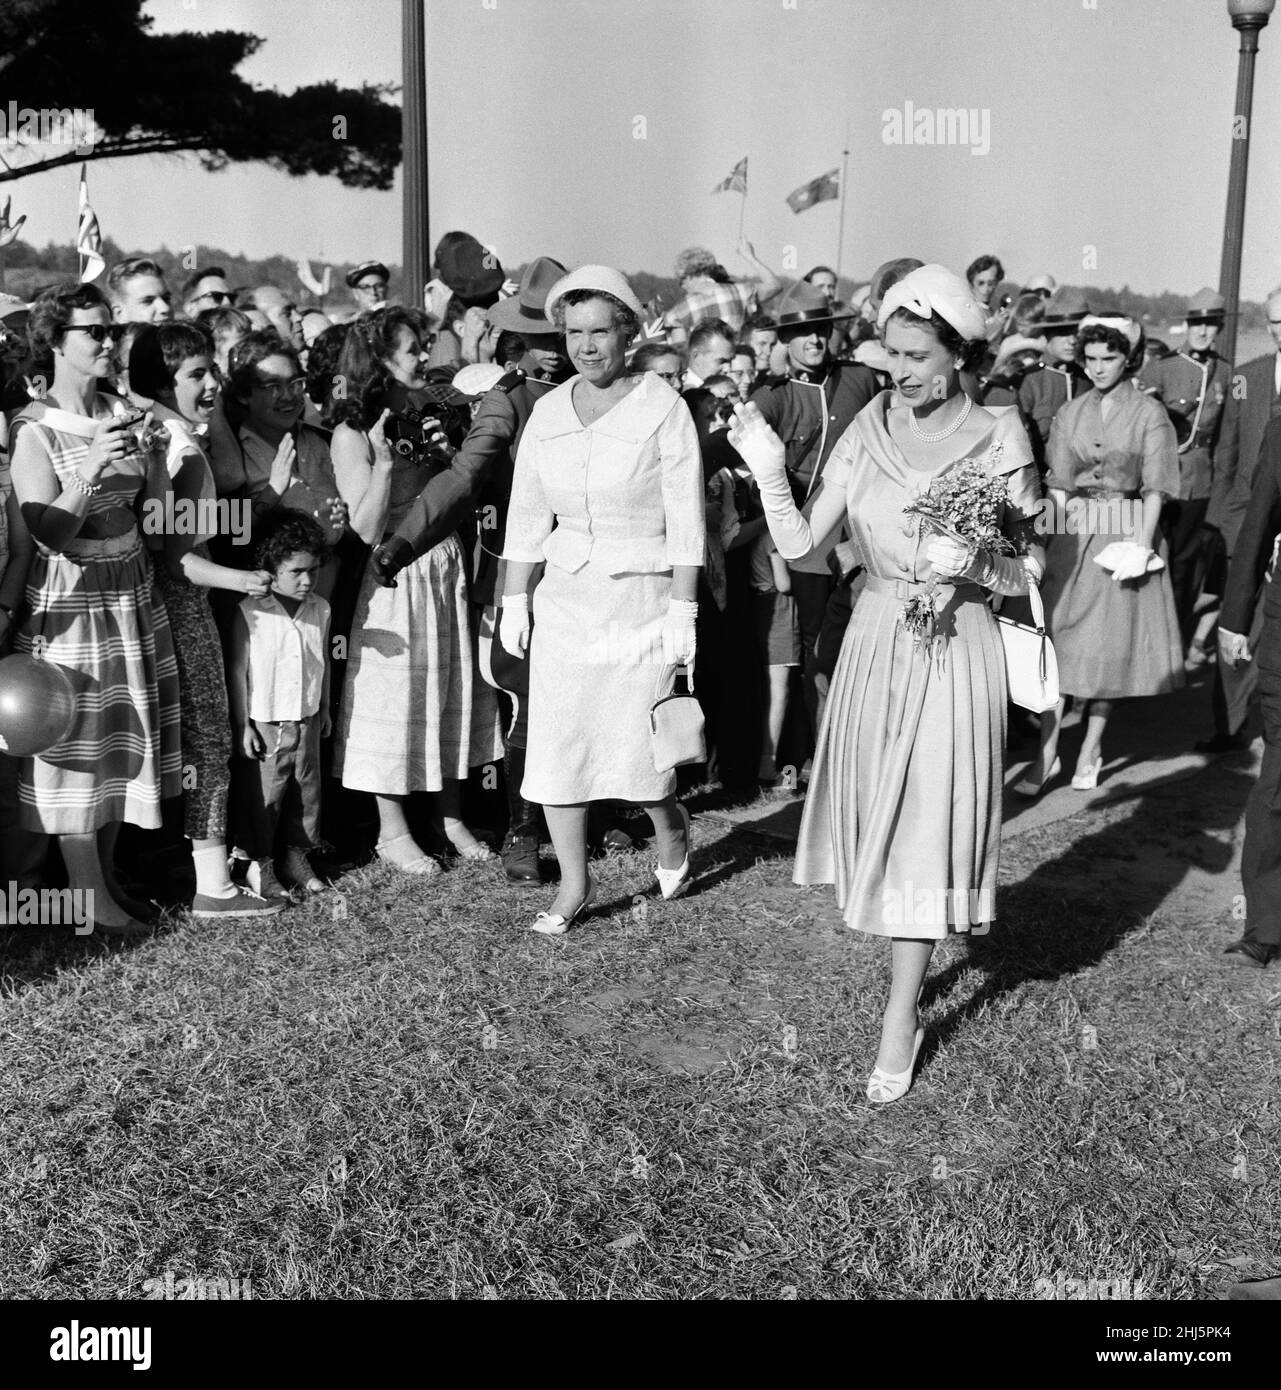 Queen Elizabeth II during the Royal tour of Canada. The Queen walks among the crowds of holidaymakers at Parry Sound on Georgian Bay, Ontario, Canada. 4th July 1959. Stock Photo